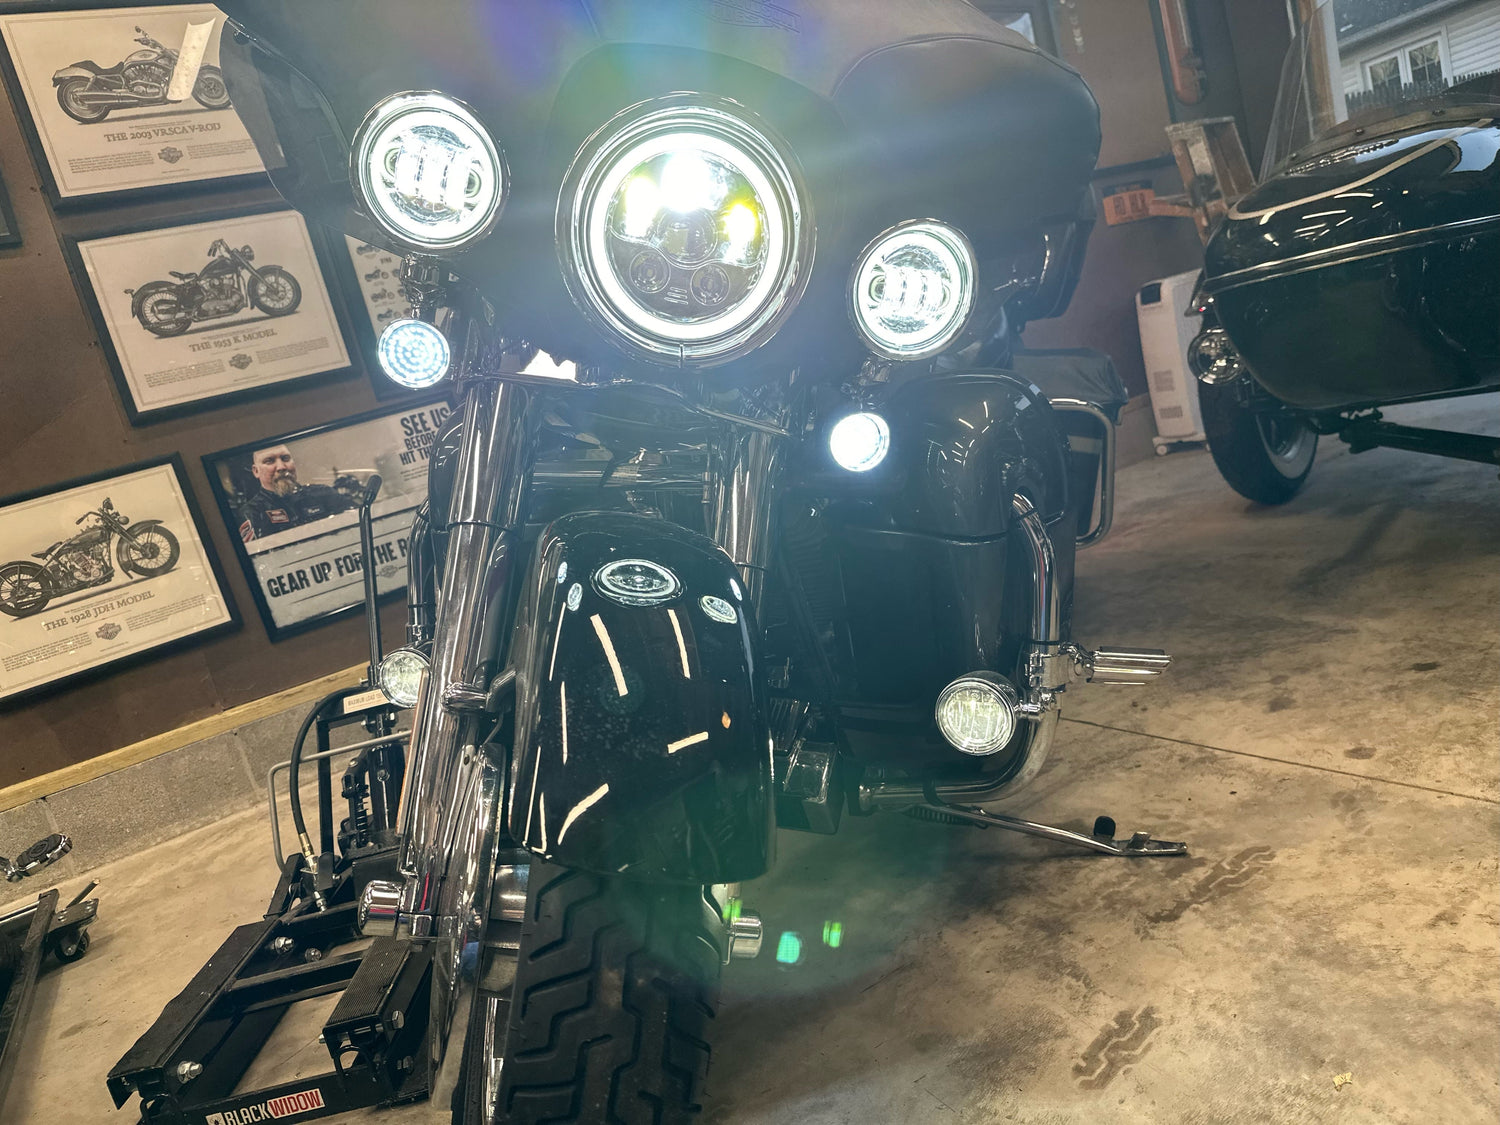 The Essential Installation Accessories for Installing a 7" LED Headlight on a Harley Davidson Motorcycle